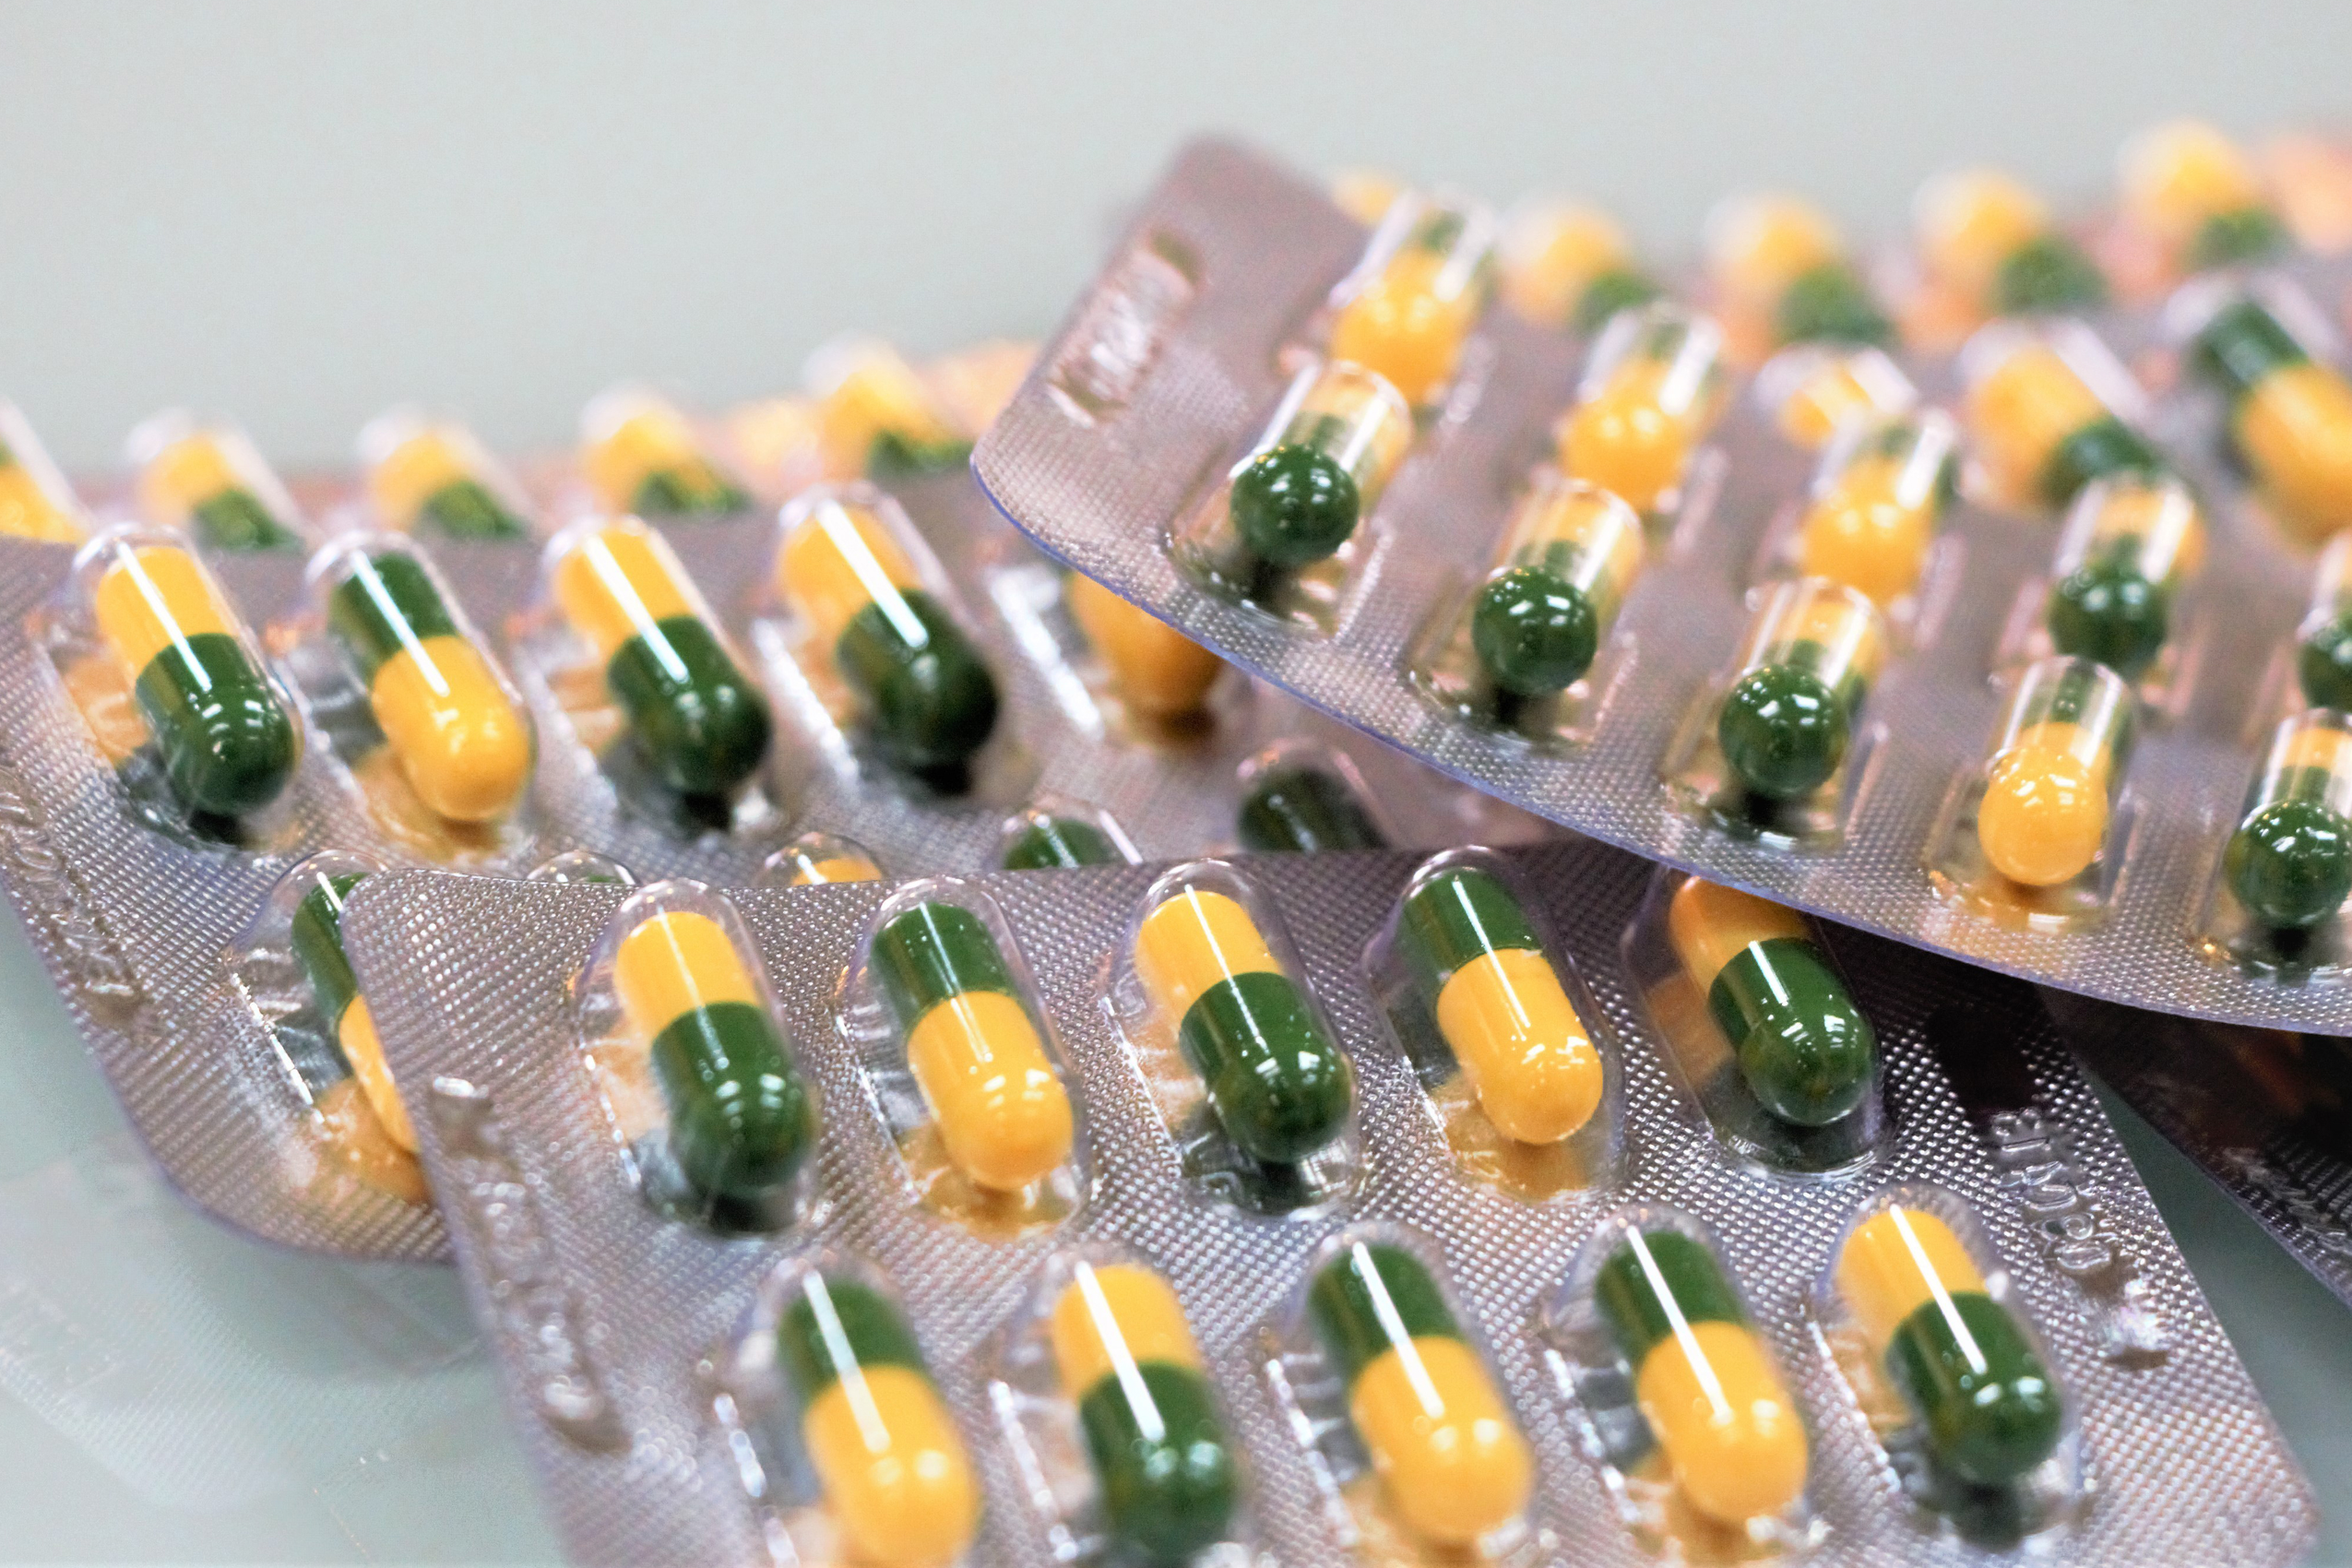 Efficacy Of Tramadol Reduced By Concurrent Use Of Some Antidepressants The Pharmaceutical Journal